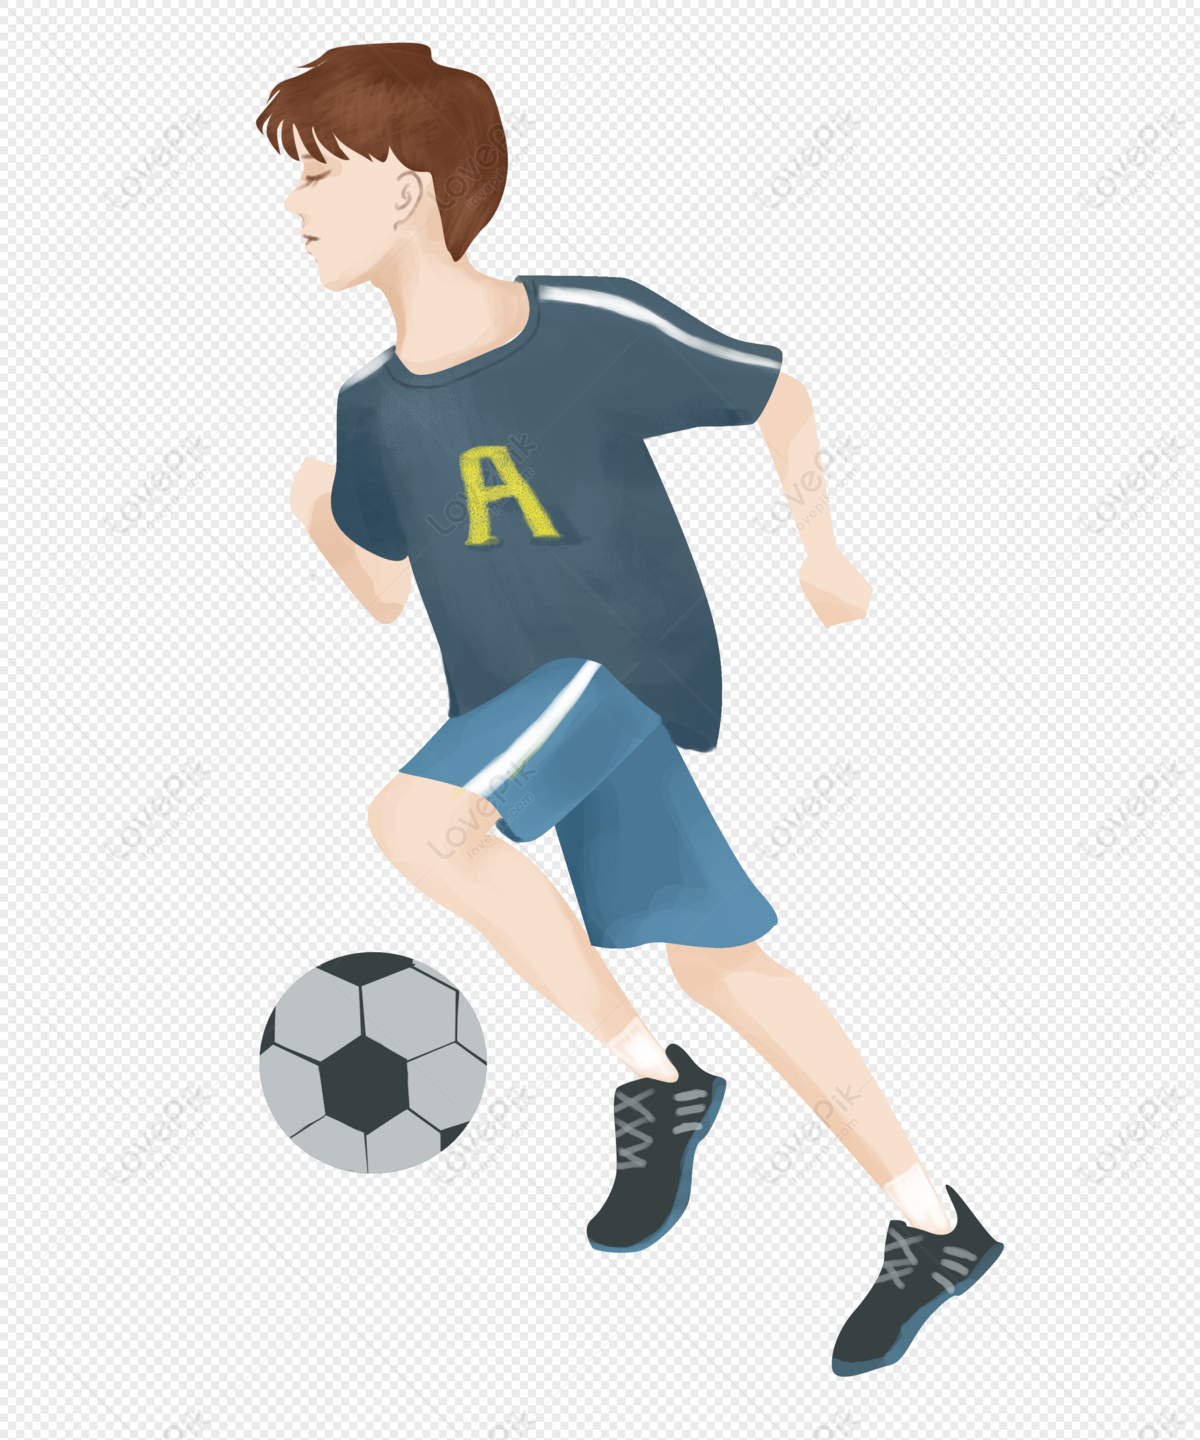 Boy Playing Football PNG Image And Clipart Image For Free Download ...